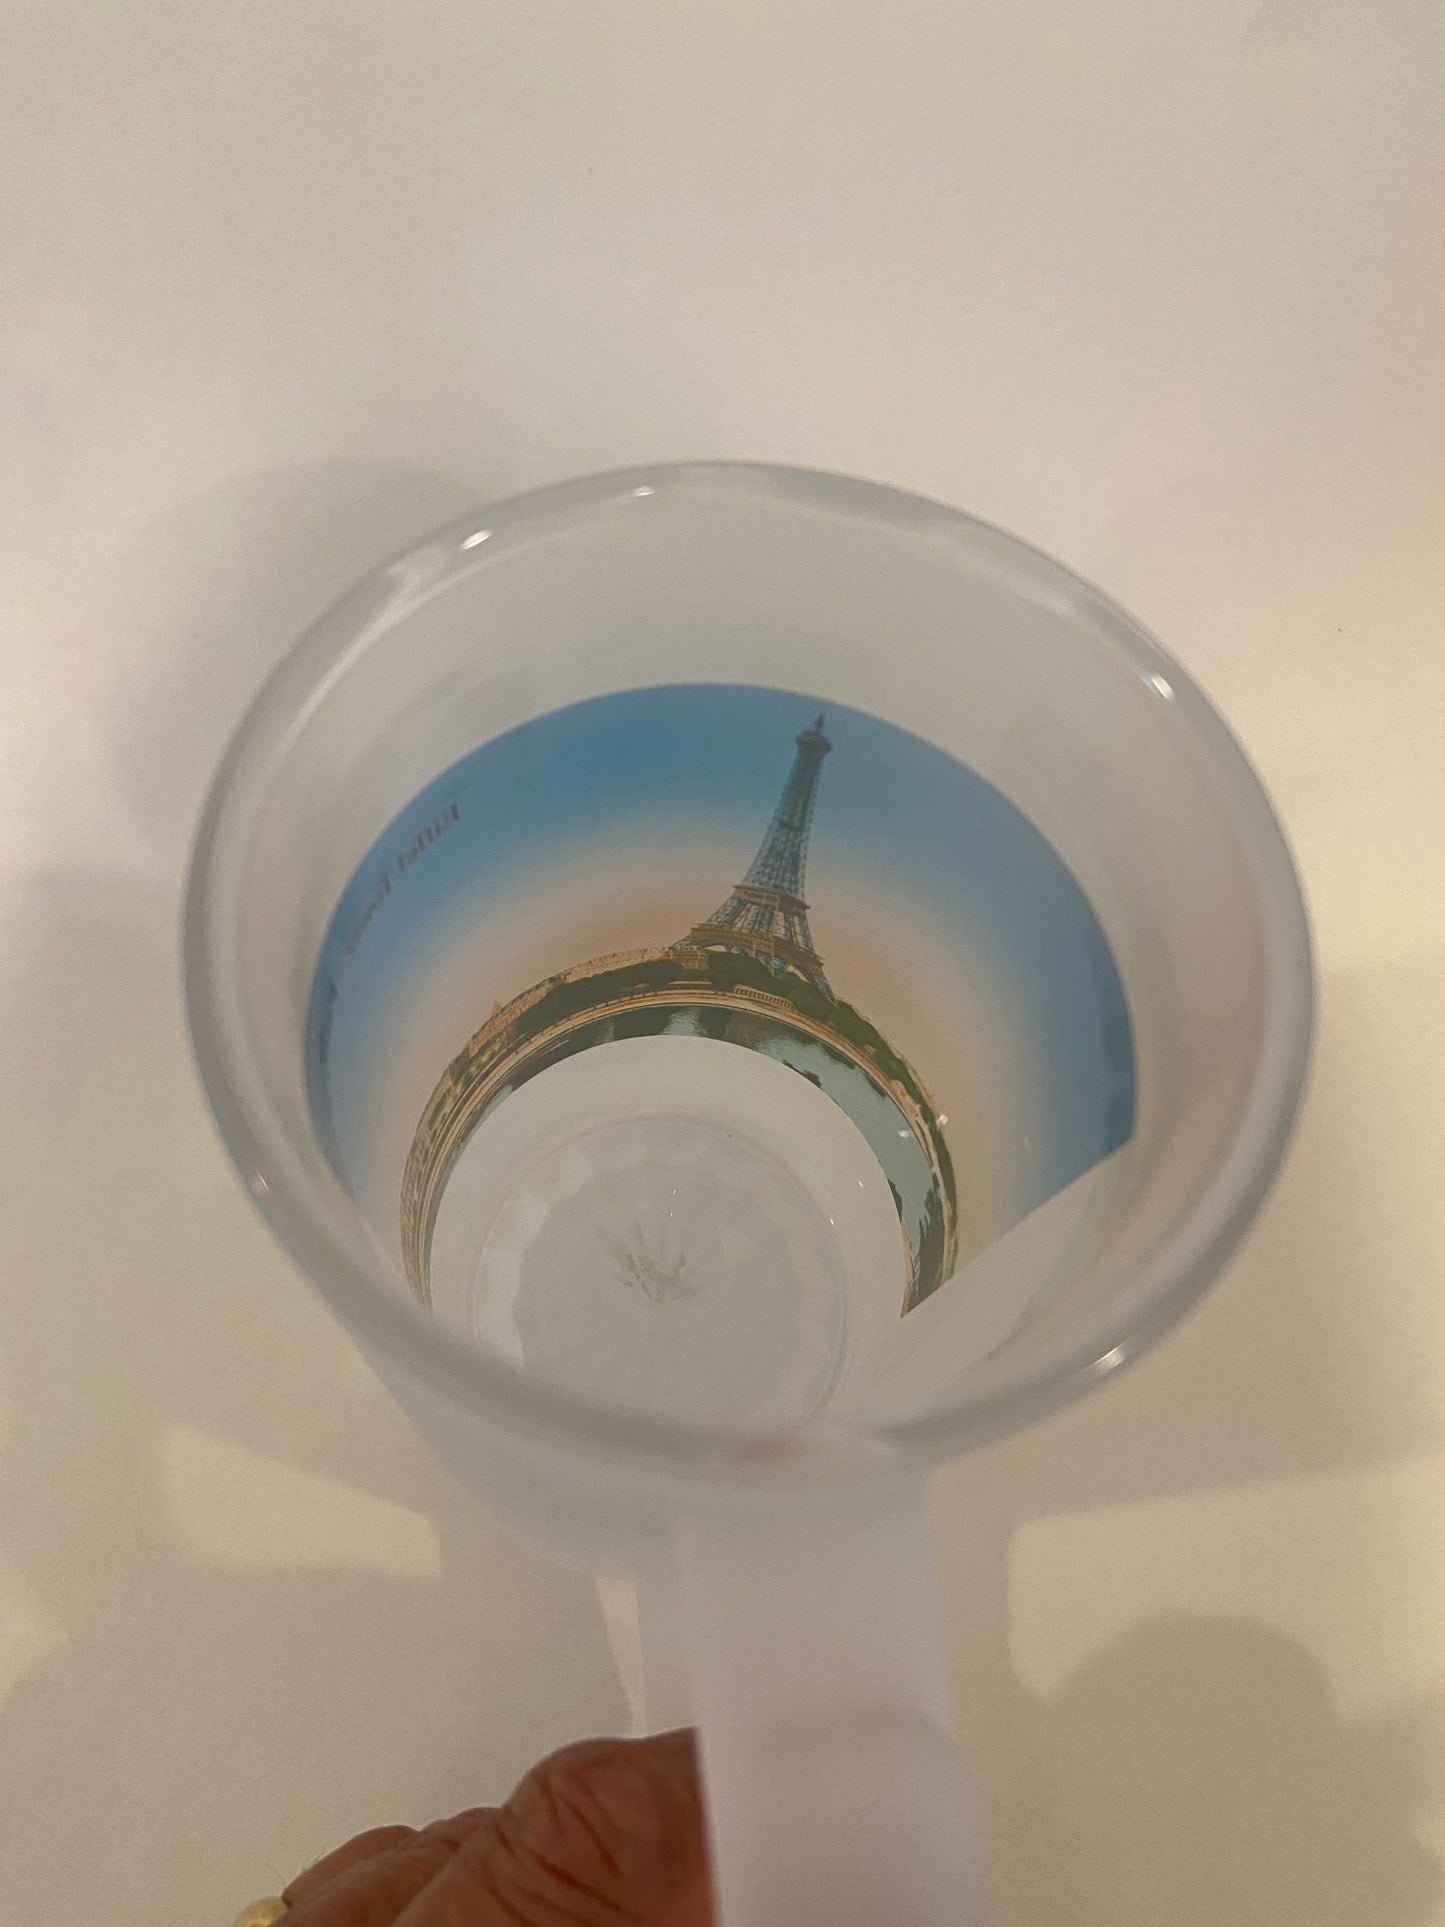 Colorful Frosted Glass Beer Mug of The Eiffel Tower